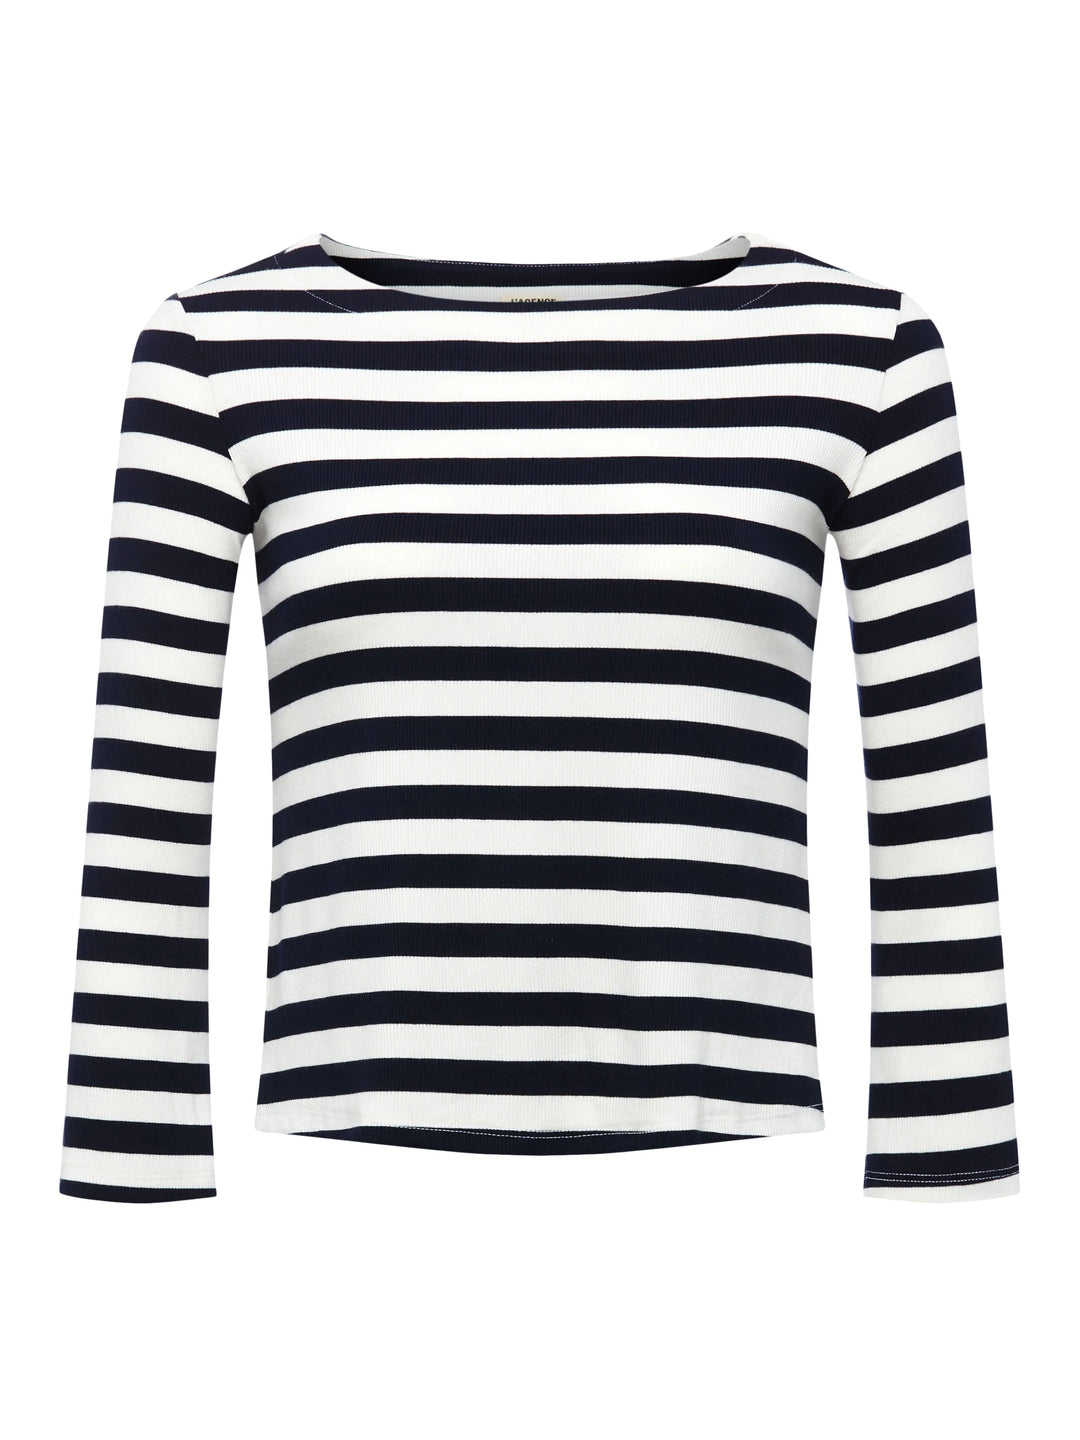 LUCILLE STRIPED TOP - L'AGENCE